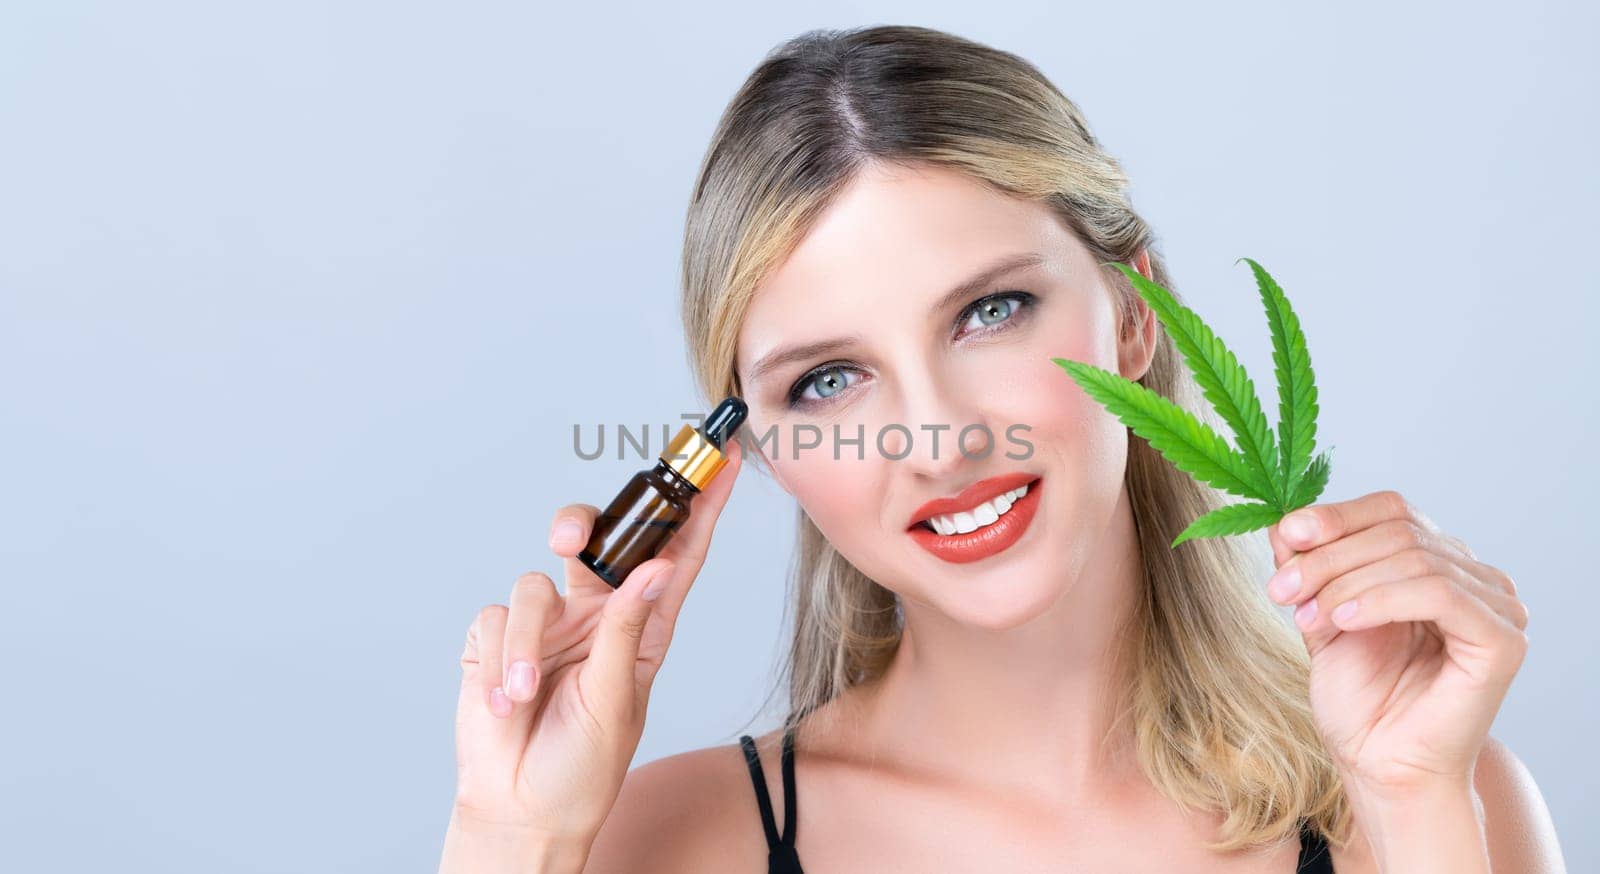 Alluring portrait of beautiful woman holding green leaf with CBD oil bottle. by biancoblue